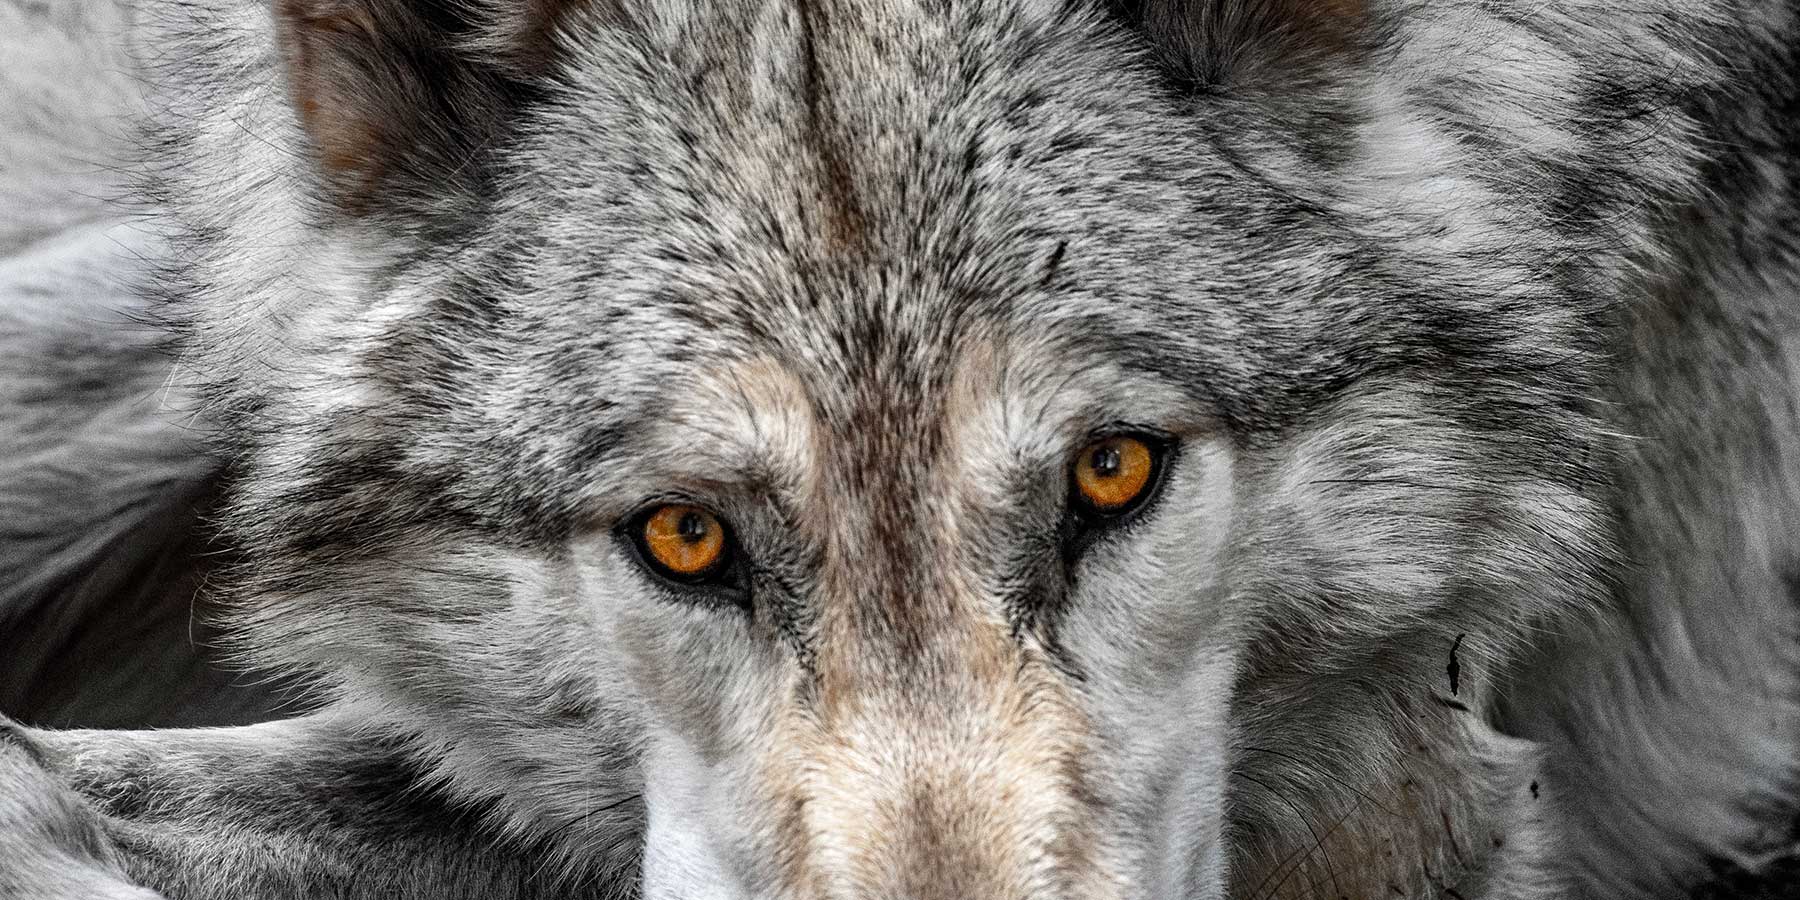 A close-up image of a wolf's face